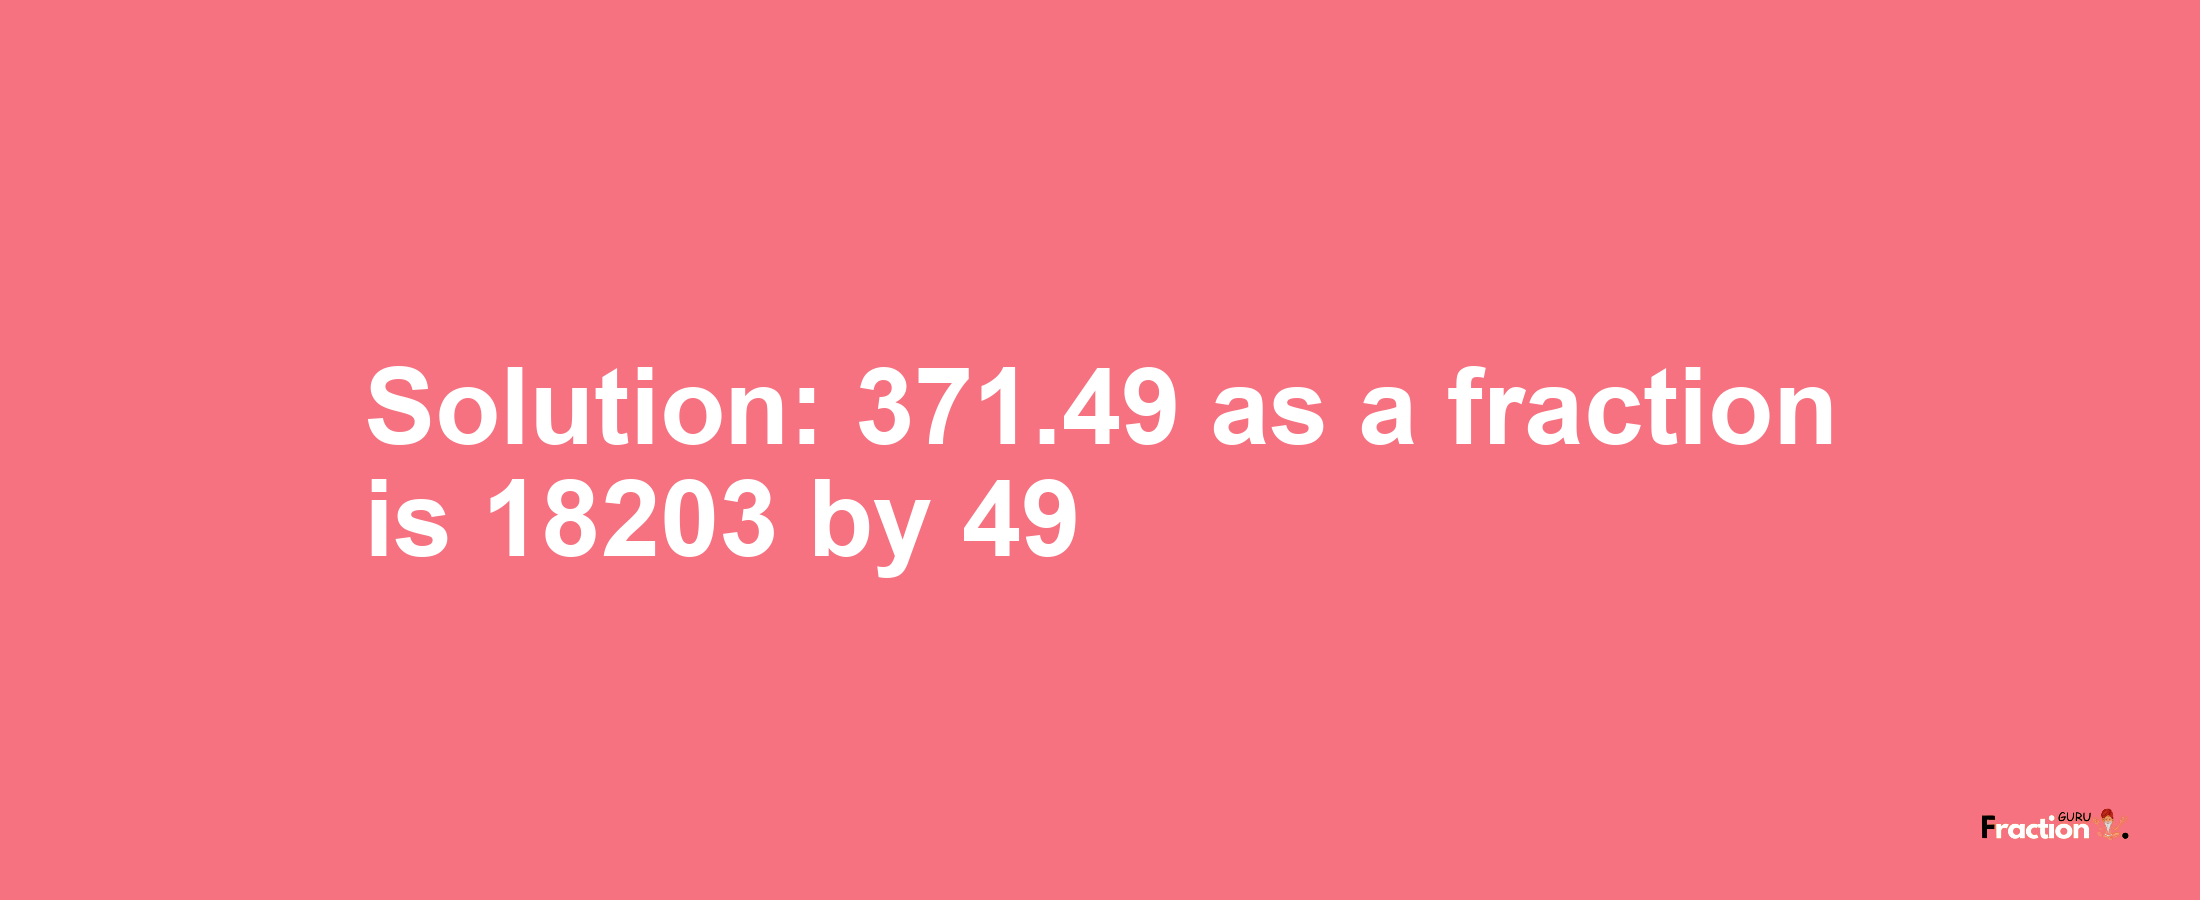 Solution:371.49 as a fraction is 18203/49